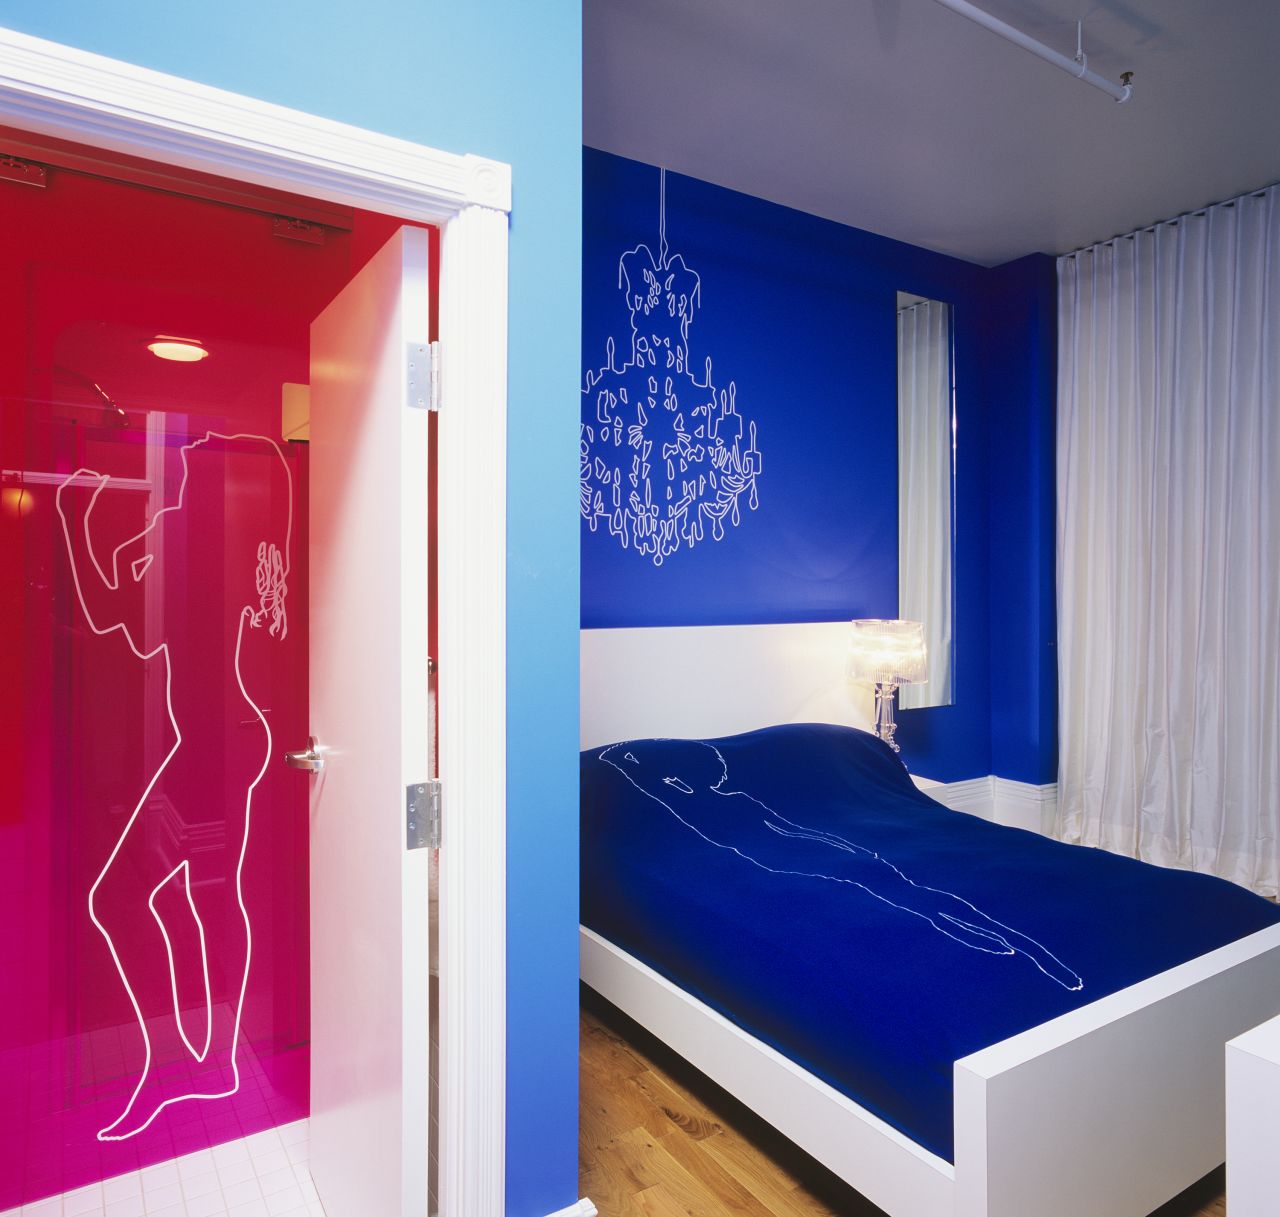 The Gladstone Hotel in Toronto, Canada, has 37 unique artist-designed room, including the Blue Line room, pictured. The shade is chroma-key blue, the color used for blue screens, allowing guests to video themselves against the walls and digitally insert their own backdrops later. 